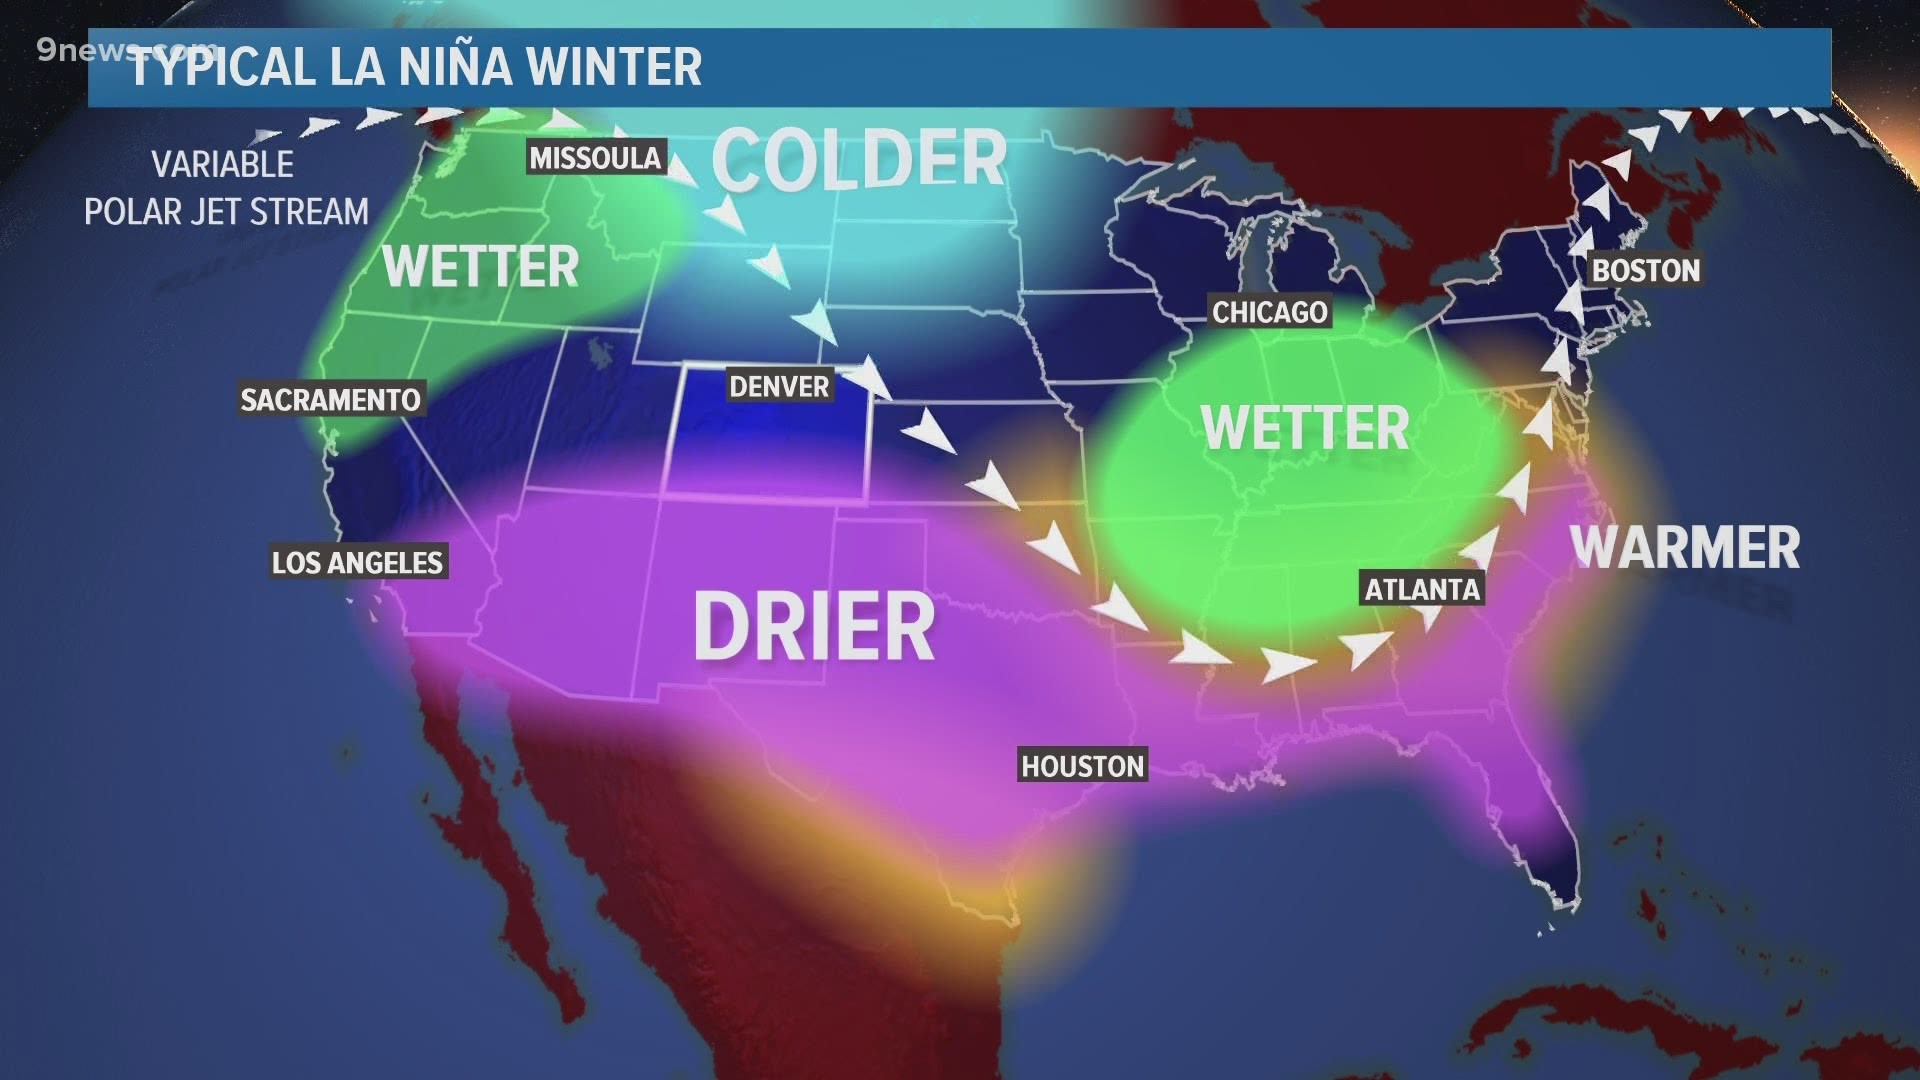 La Nina weather pattern said to be one of the strongest in the decade